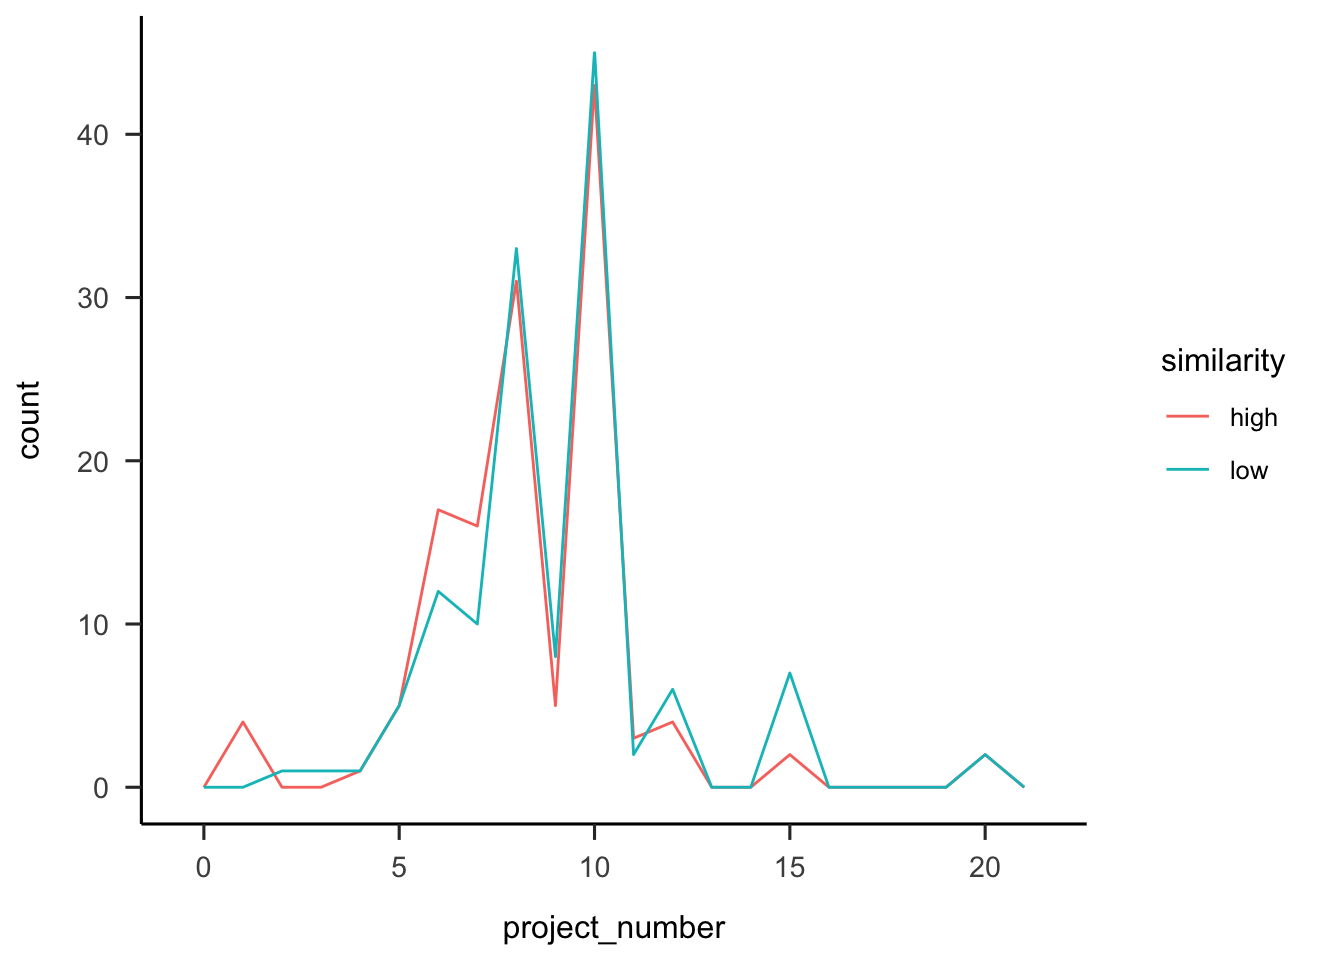 Number of projects participants reported seeing, by similarity.